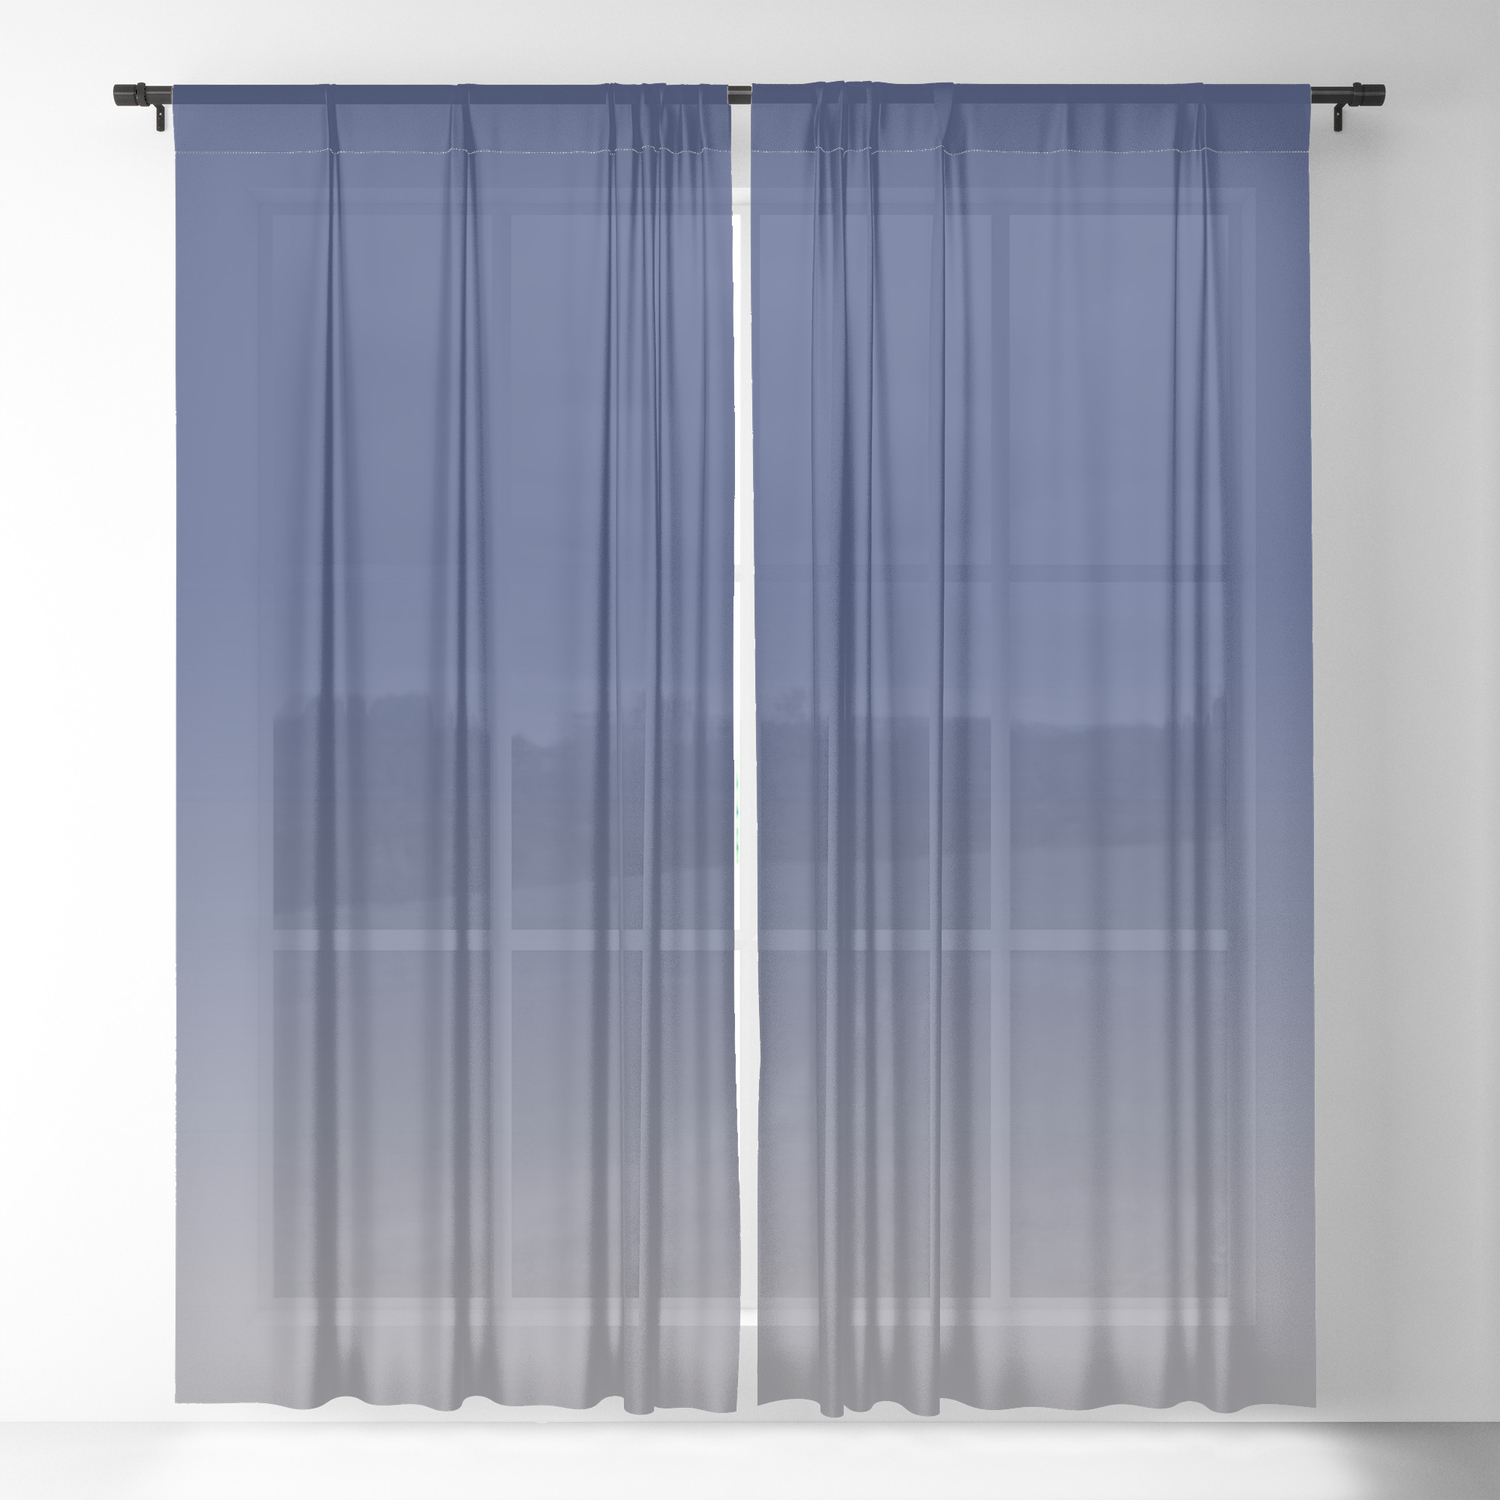 Gradient, Masculine Sheer Curtain by inklola | Society6